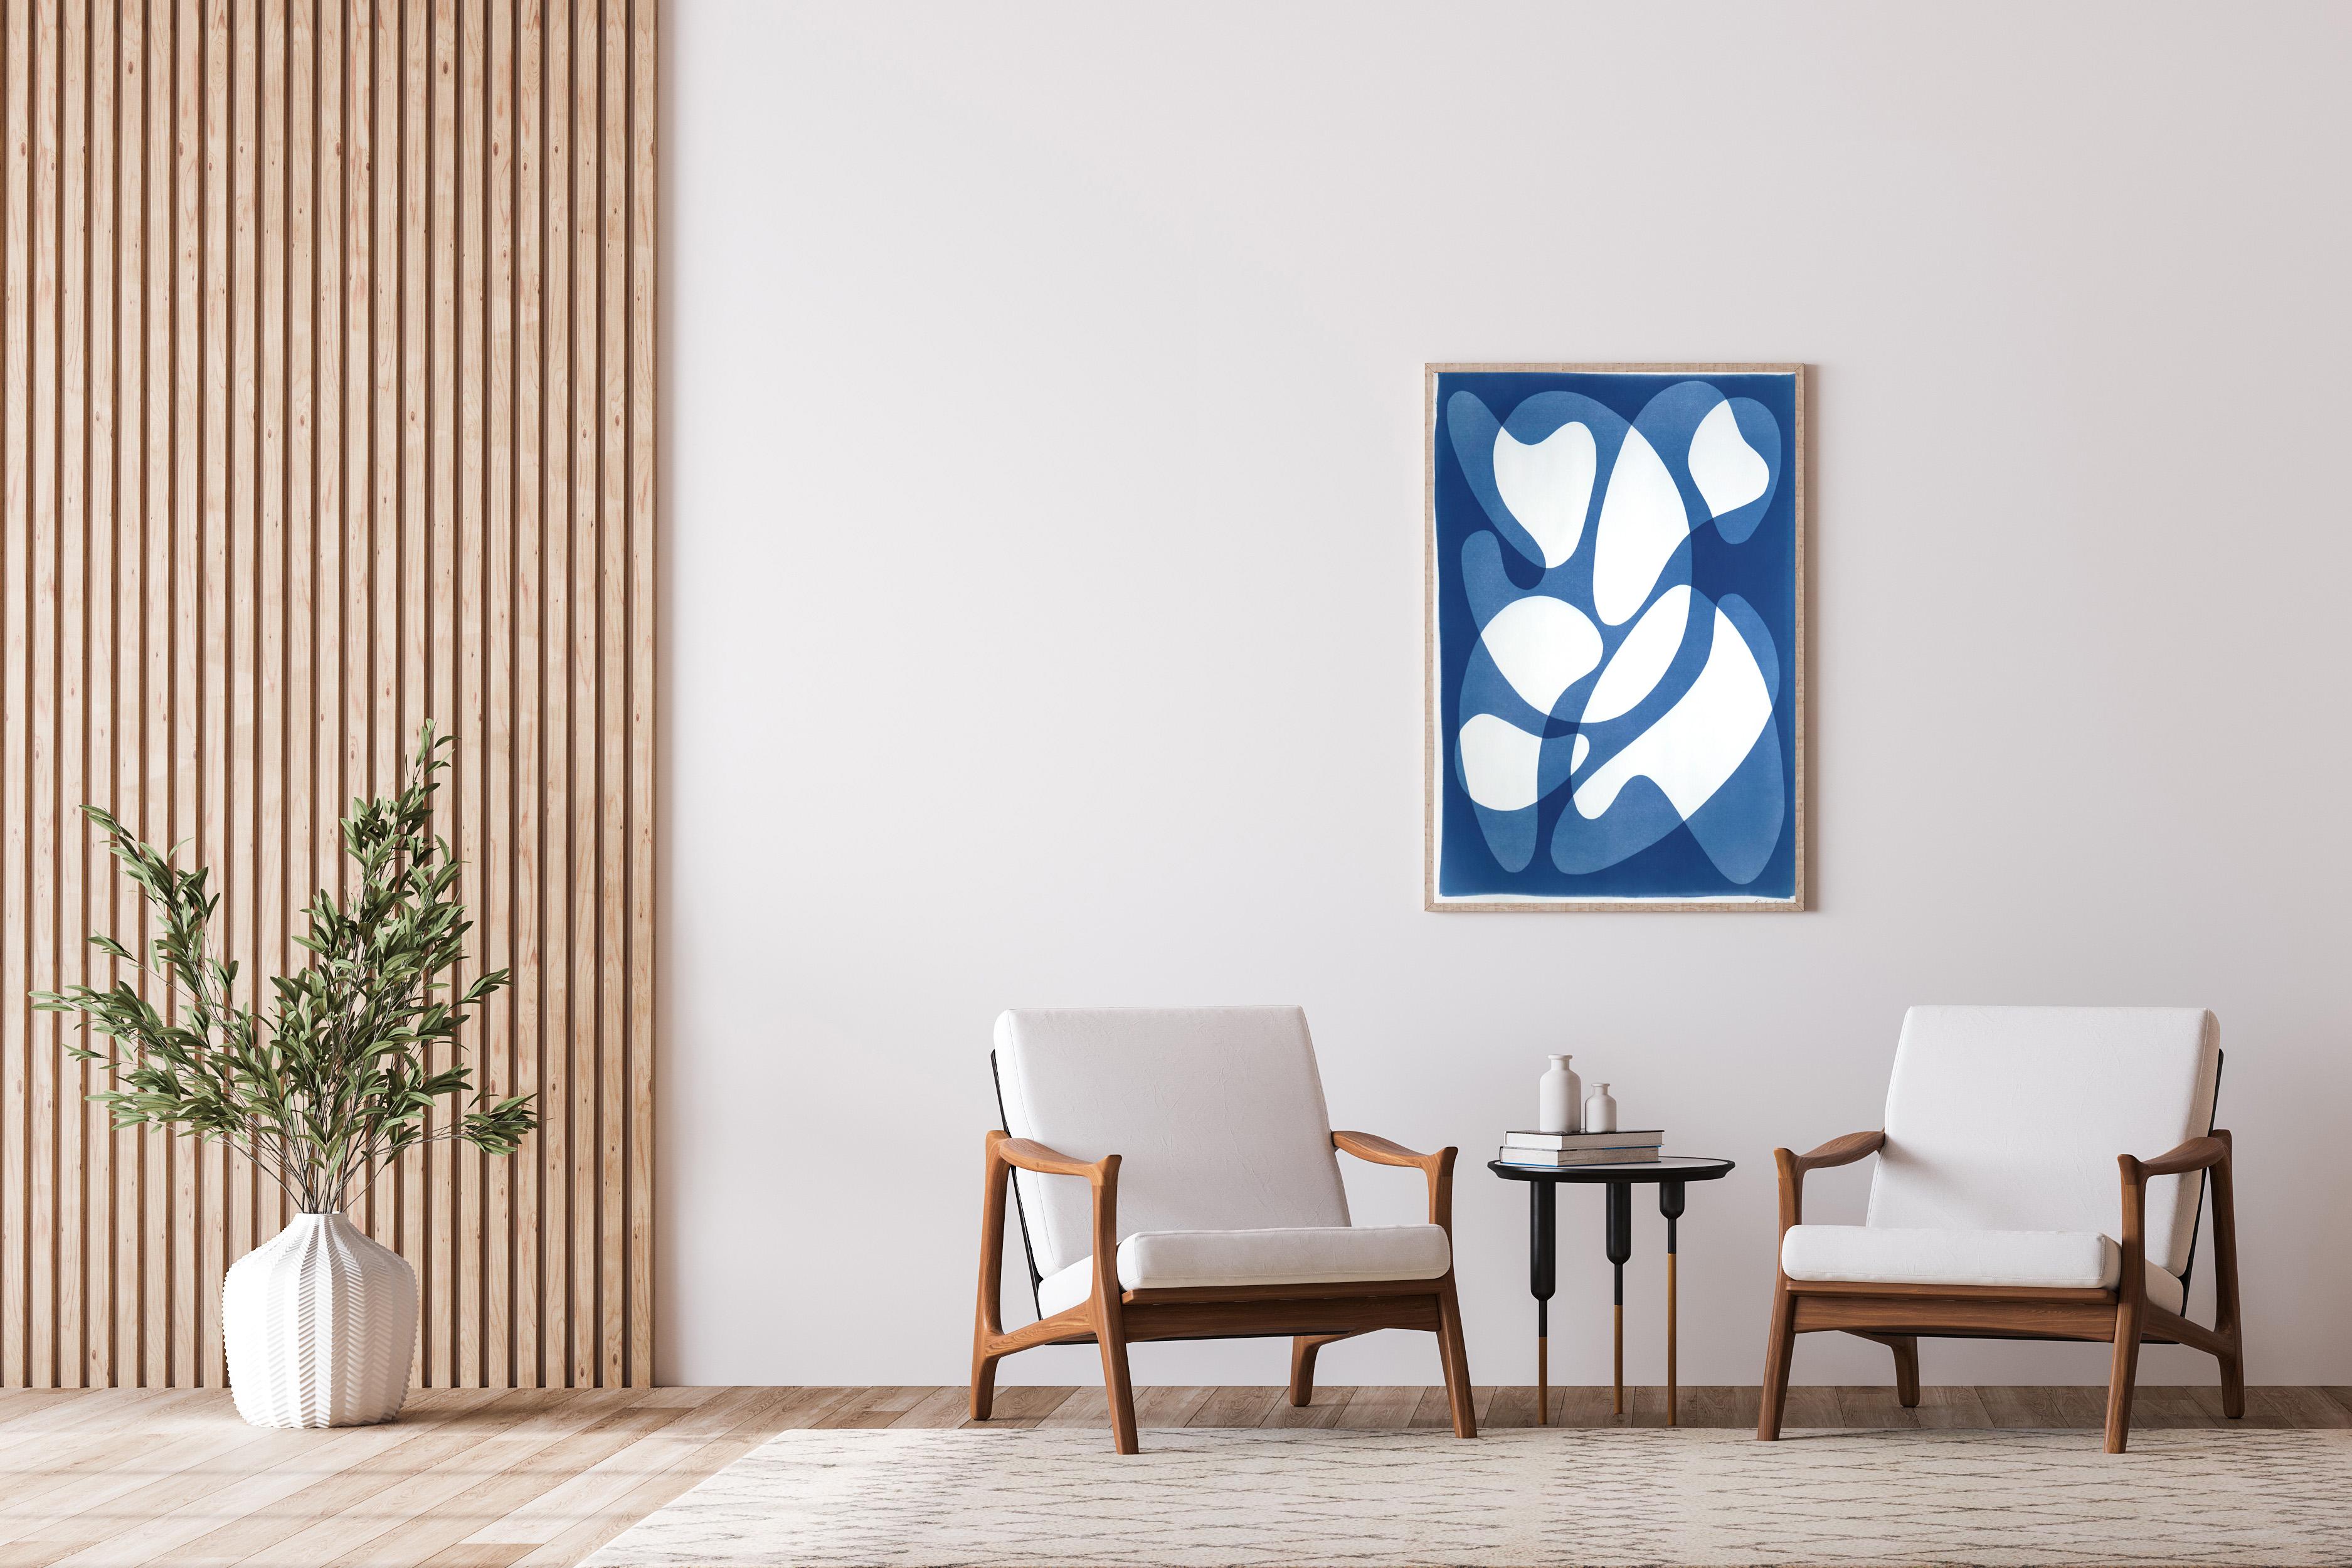 This is an exclusive handprinted unique cyanotype that takes its inspiration from the mid-century modern shapes.
It's made by layering paper cutouts and different exposures using uv-light. 

Details:
+ Title: Mid-Century Shapes II
+ Year: 2022
+